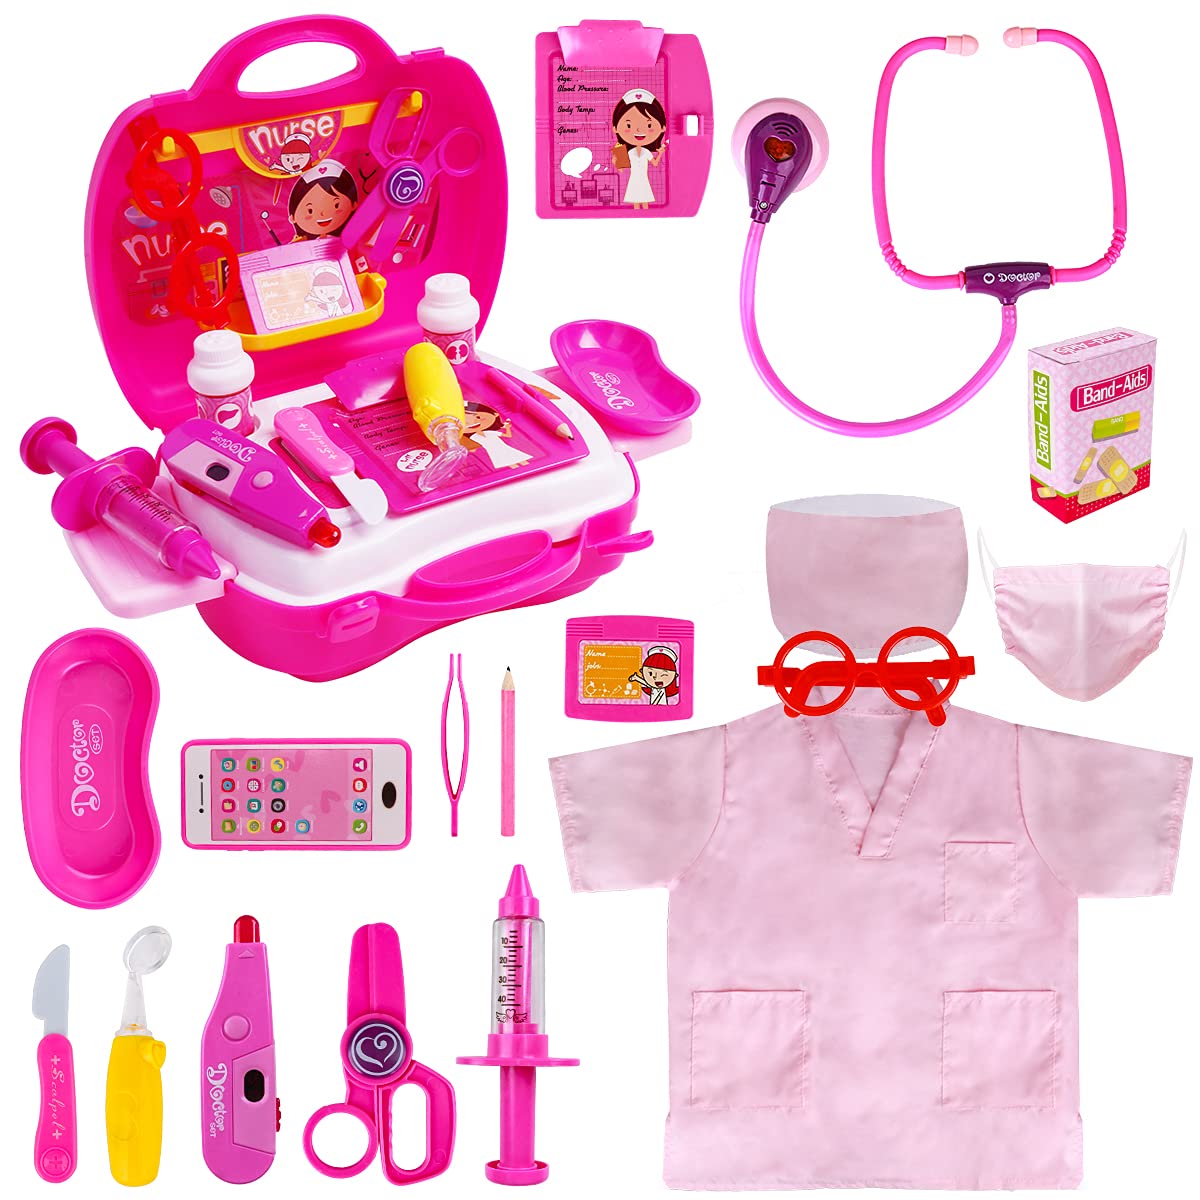 Meland Toy Doctor Kit for Kids - Pretend Play Doctor Set with Carrying Case, Electronic Stethoscope & Dress Up Costume - Doctor Play Set for Girls Toddlers Ages 3 4 5 6 Year Old for Role Play Gift